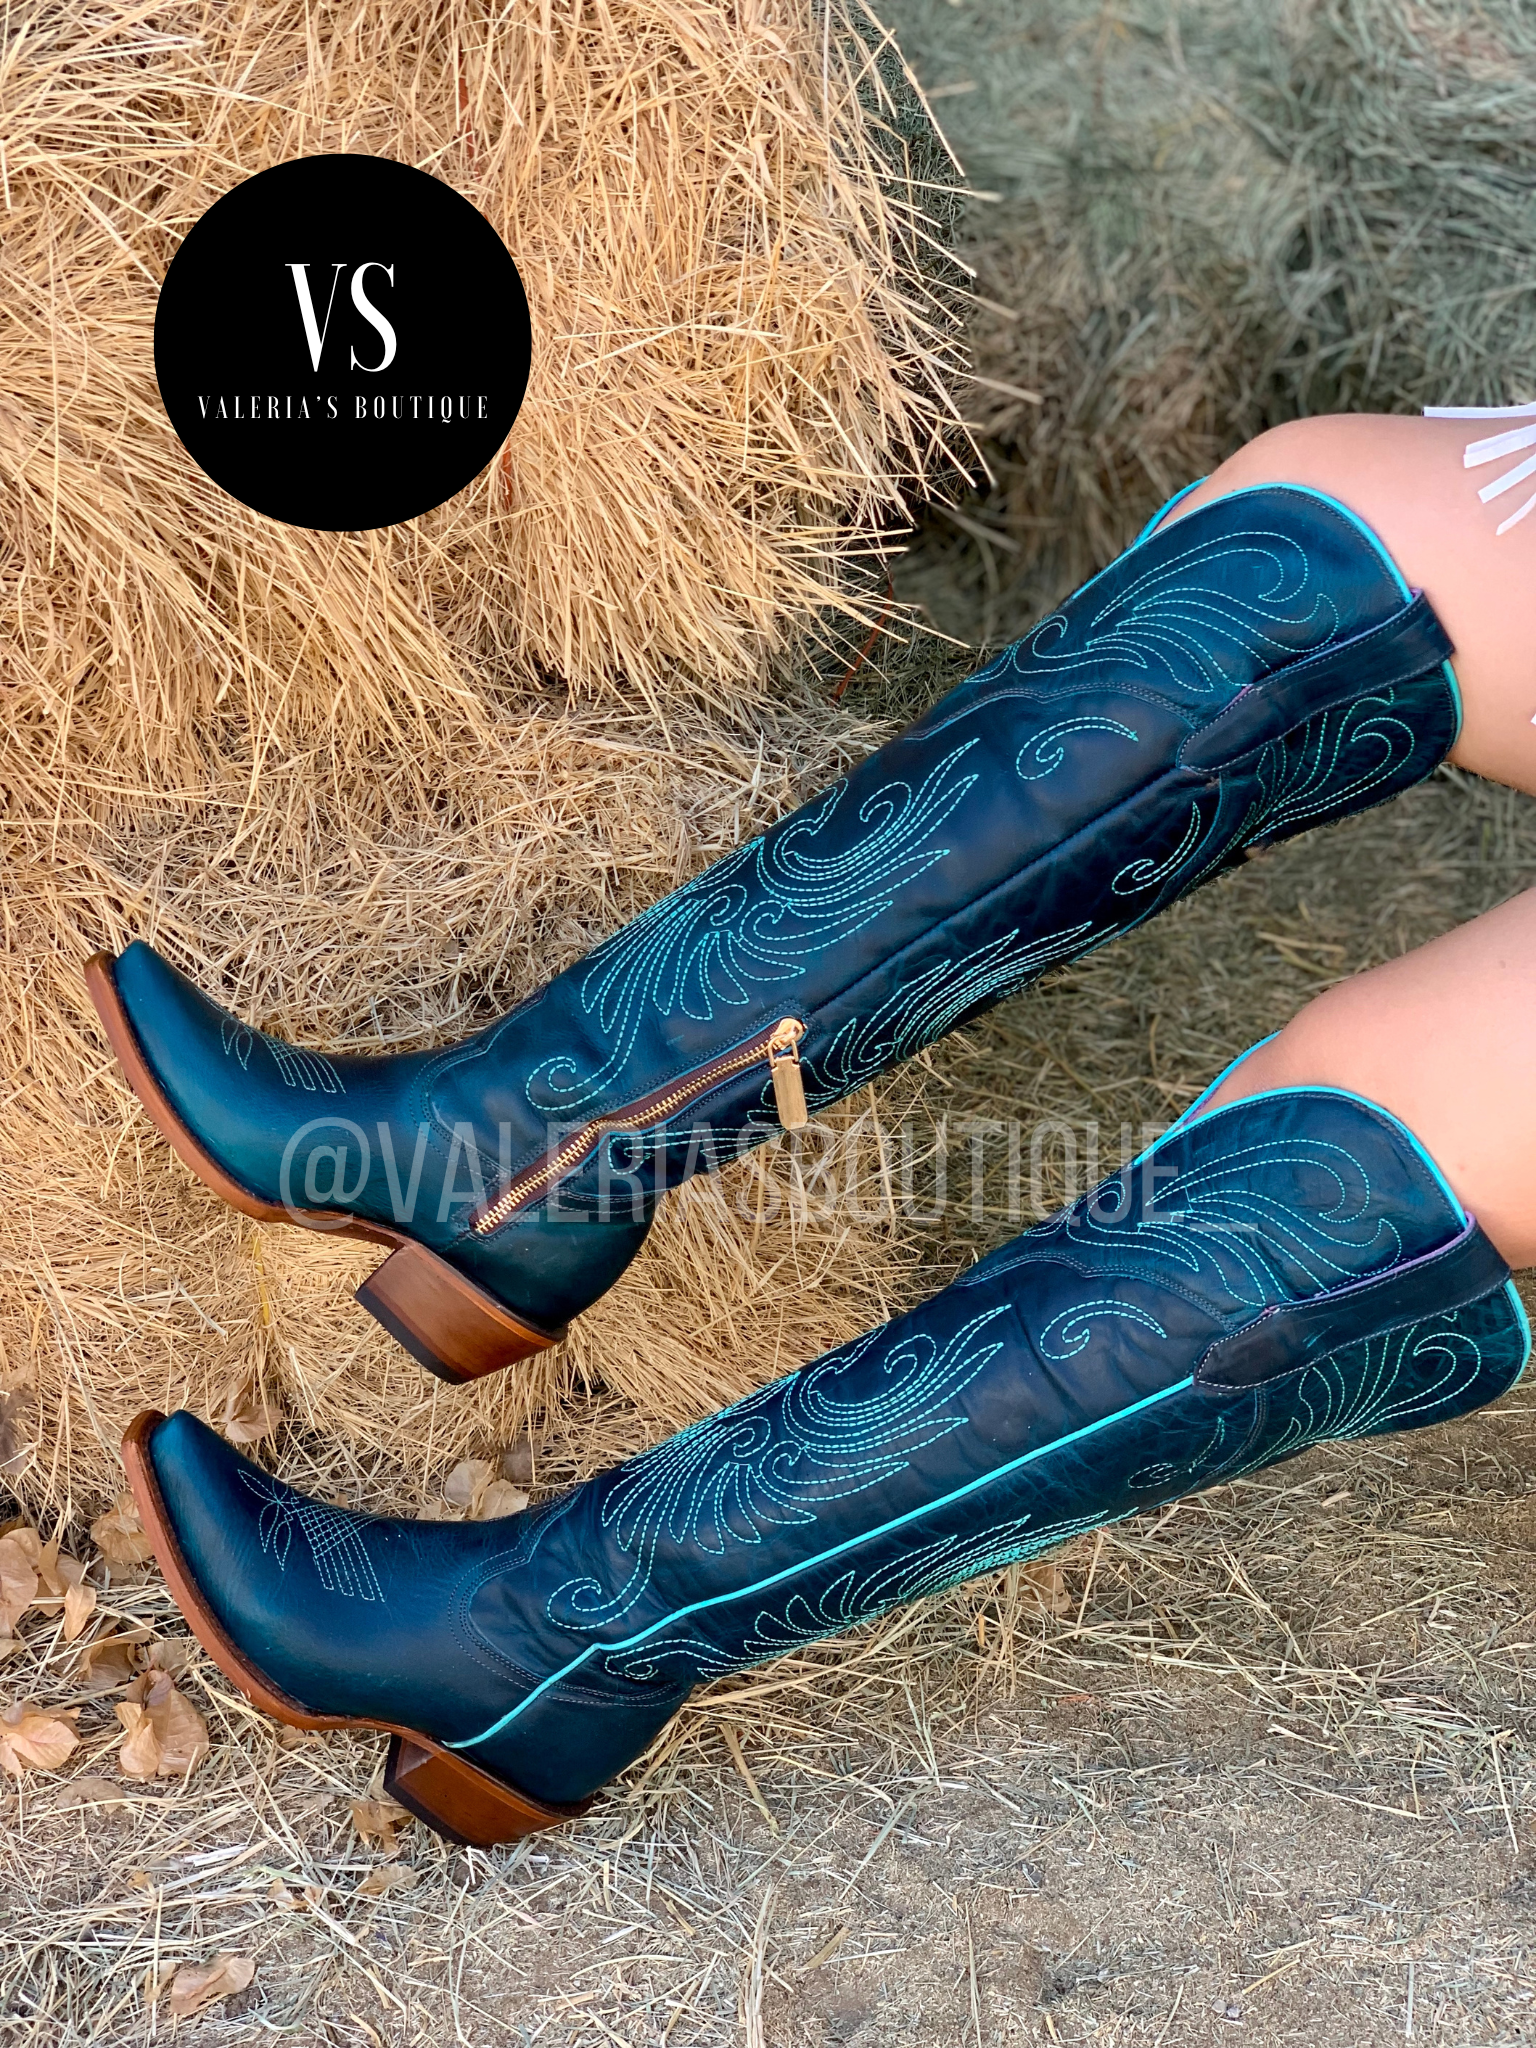 Valeria'S Boutique Teal Tall Western Boots